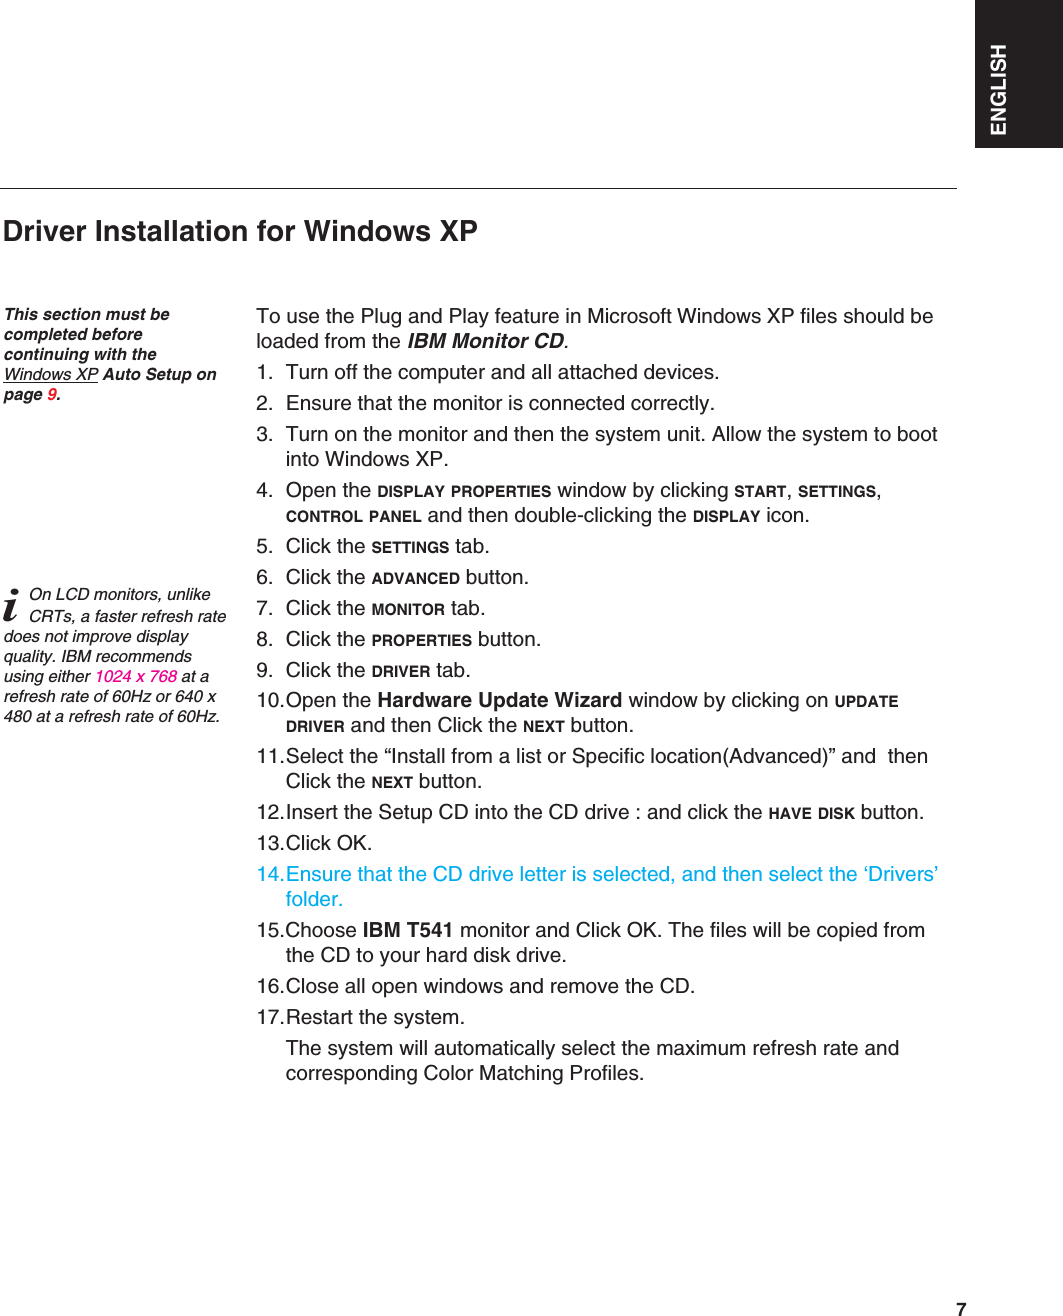 ENGLISH7To use the Plug and Play feature in Microsoft Windows XP files should beloaded from the IBM Monitor CD.1. Turn off the computer and all attached devices.2. Ensure that the monitor is connected correctly.3. Turn on the monitor and then the system unit. Allow the system to bootinto Windows XP.4. Open the DISPLAY PROPERTIES window by clicking START, SETTINGS,CONTROL PANEL and then double-clicking the DISPLAY icon.5. Click the SETTINGS tab.6. Click the ADVANCED button.7. Click the MONITOR tab.8. Click the PROPERTIES button.9. Click the DRIVER tab.10.Open the Hardware Update Wizard window by clicking on UPDATEDRIVER and then Click the NEXT button.11.Select the “Install from a list or Specific location(Advanced)” and  thenClick the NEXT button.12.Insert the Setup CD into the CD drive : and click the HAVE DISK button.13.Click OK.14.Ensure that the CD drive letter is selected, and then select the ‘Drivers’folder.15.Choose IBM T541 monitor and Click OK. The files will be copied fromthe CD to your hard disk drive.16.Close all open windows and remove the CD.17.Restart the system.The system will automatically select the maximum refresh rate andcorresponding Color Matching Profiles.Driver Installation for Windows XP This section must becompleted before continuing with the Windows XP Auto Setup onpage 9.iOn LCD monitors, unlikeCRTs, a faster refresh ratedoes not improve displayquality. IBM recommendsusing either 1024 x 768 at arefresh rate of 60Hz or 640 x480 at a refresh rate of 60Hz.